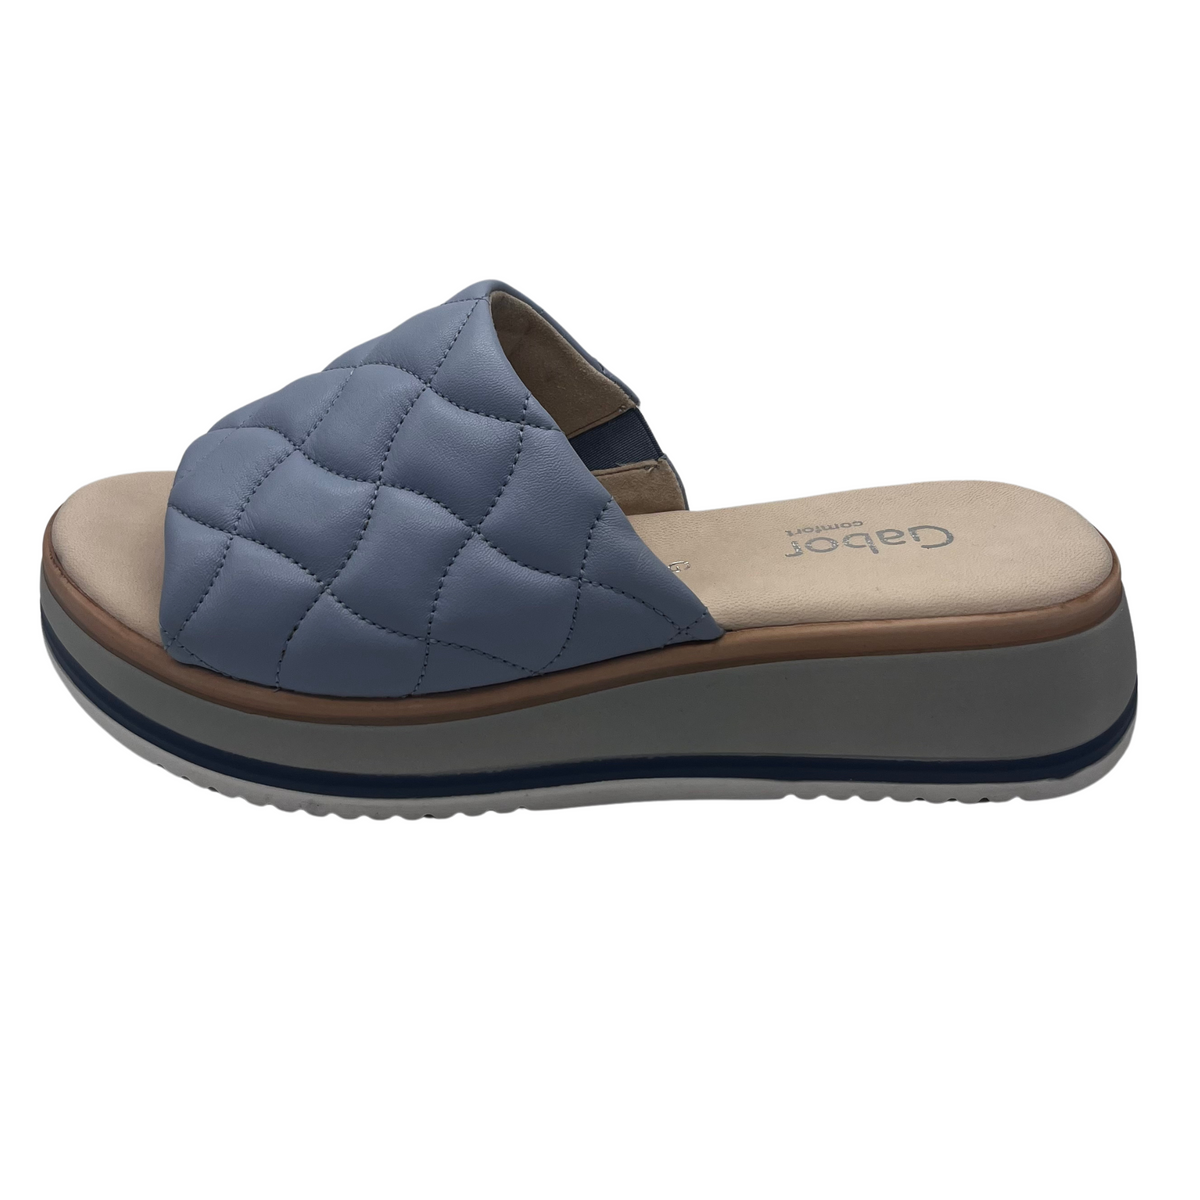 Gabor Leather Blue Quilted Wedge Slider